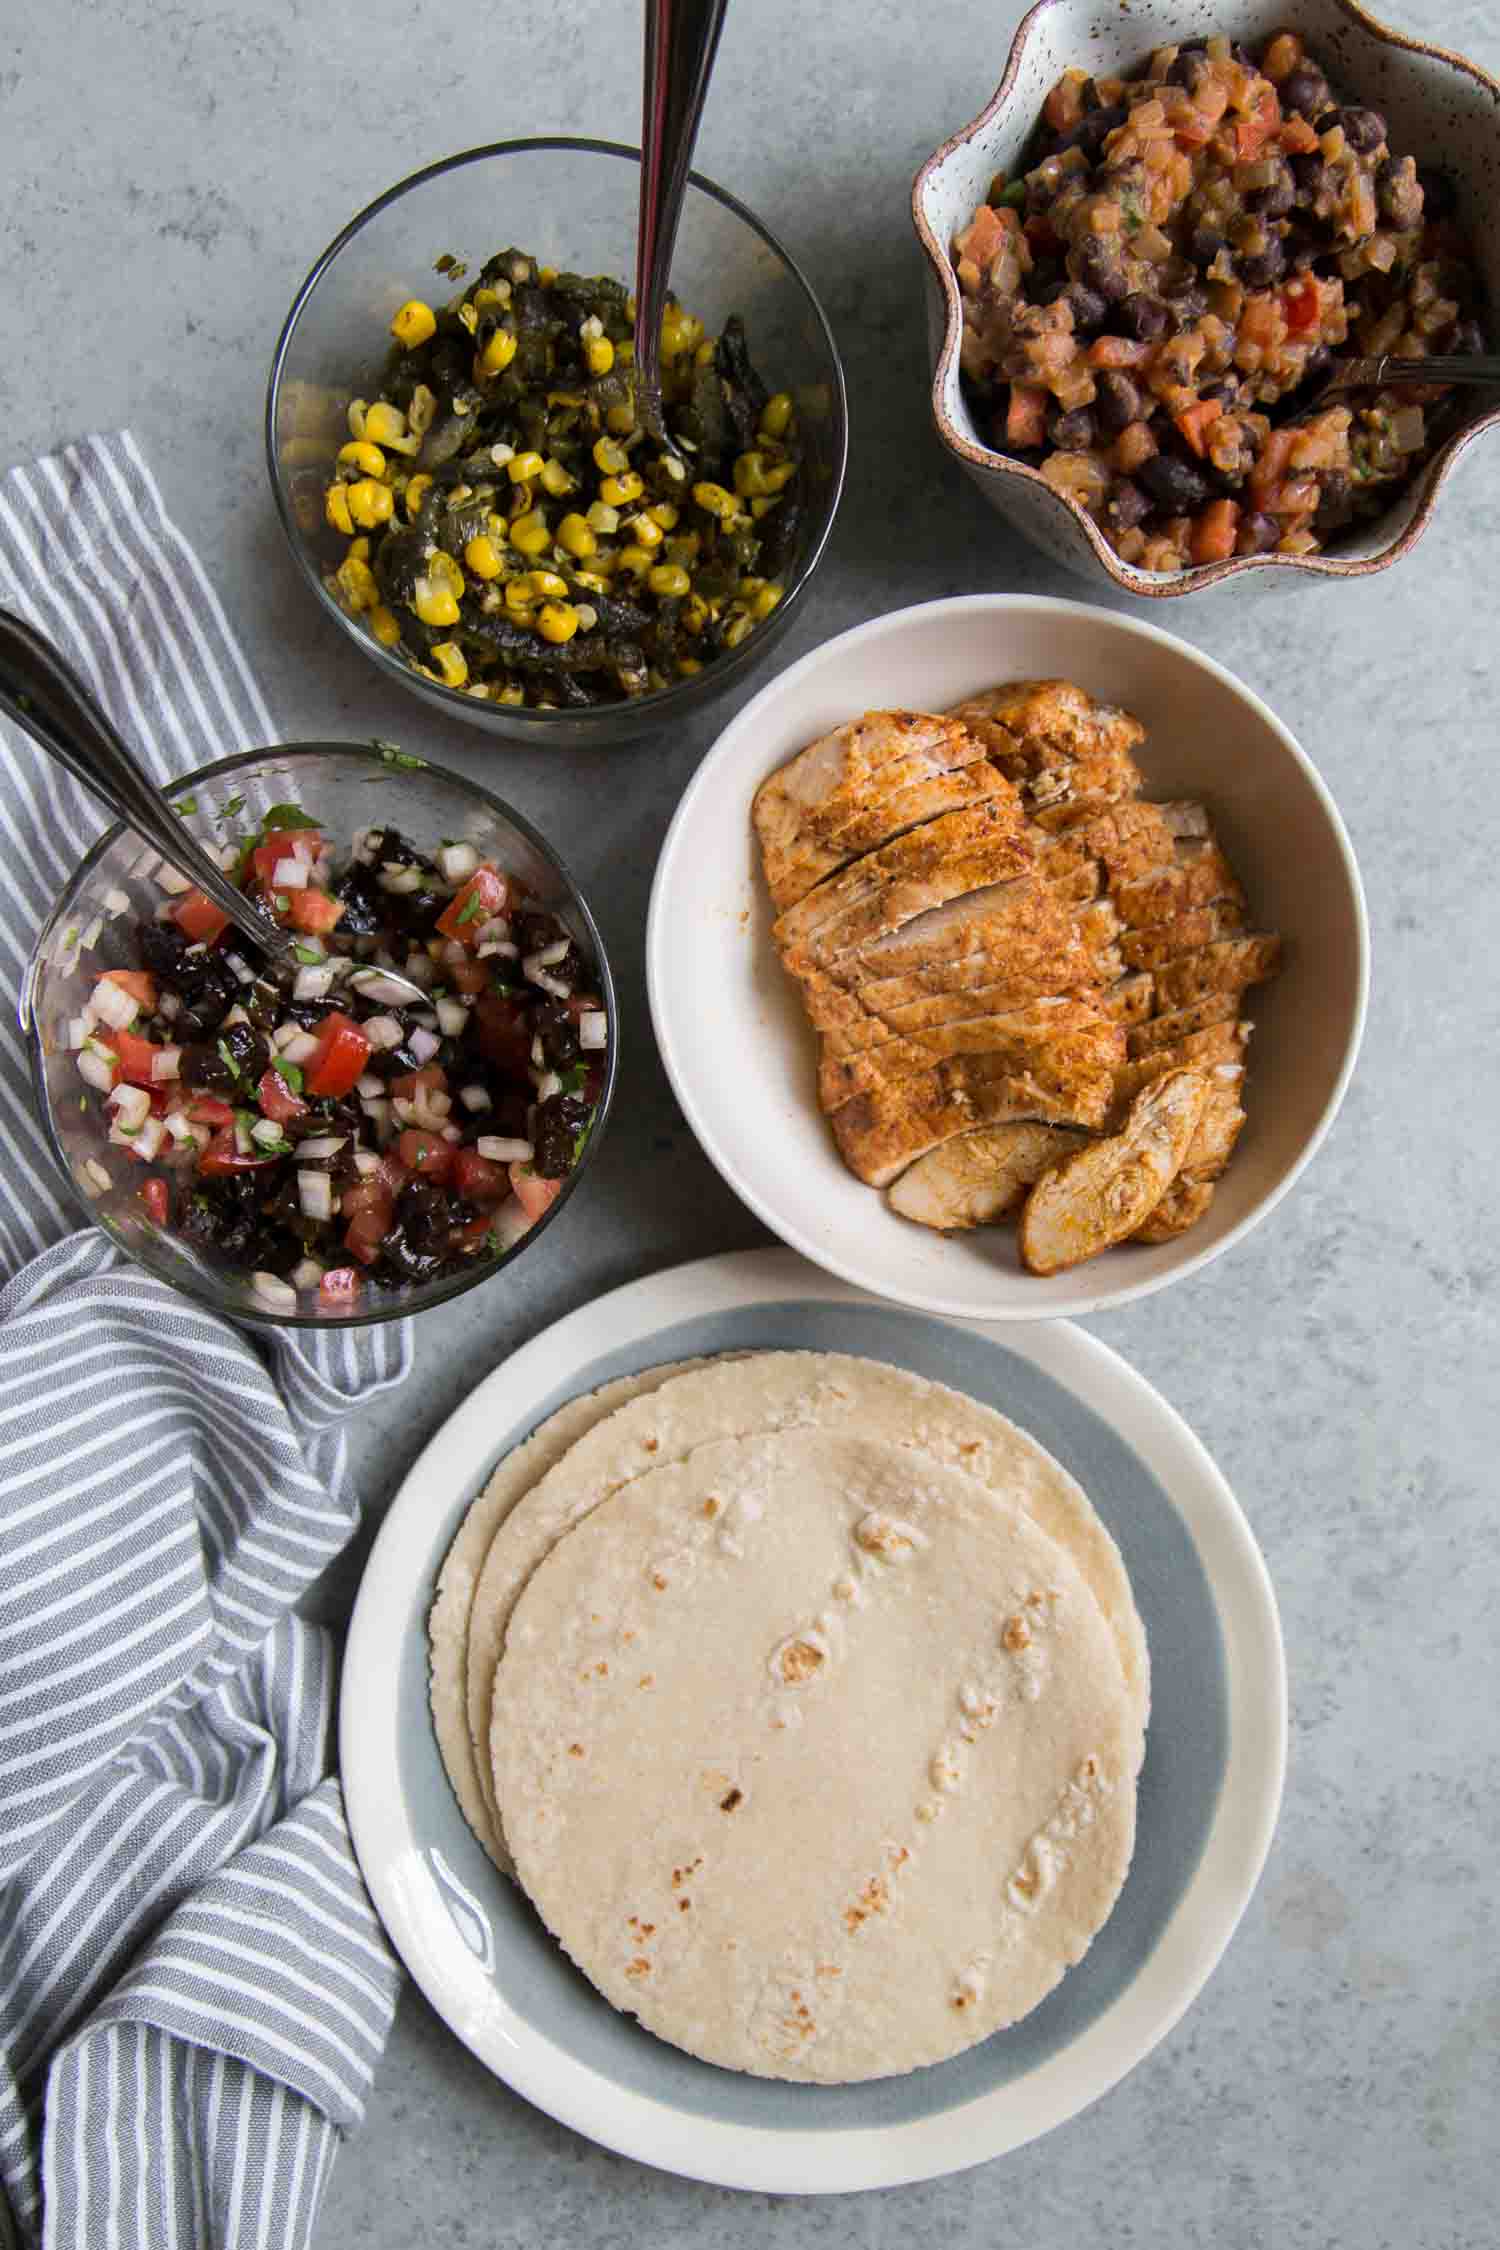 Chicken Tacos with California Prunes Salsa and Refried Black Beans